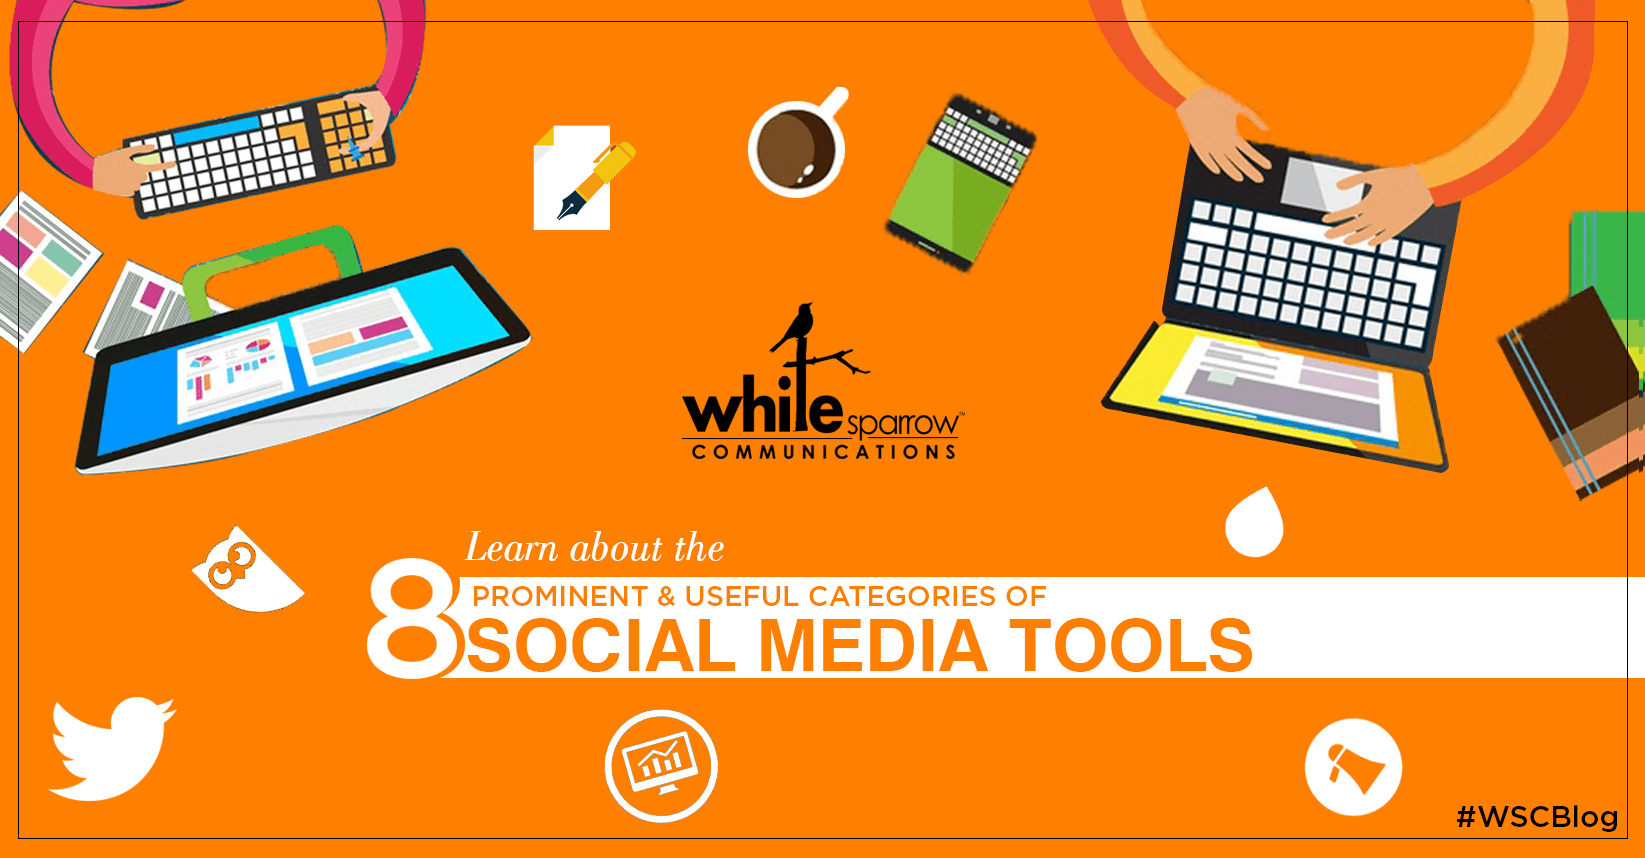 Different Categories of Social Media Tools